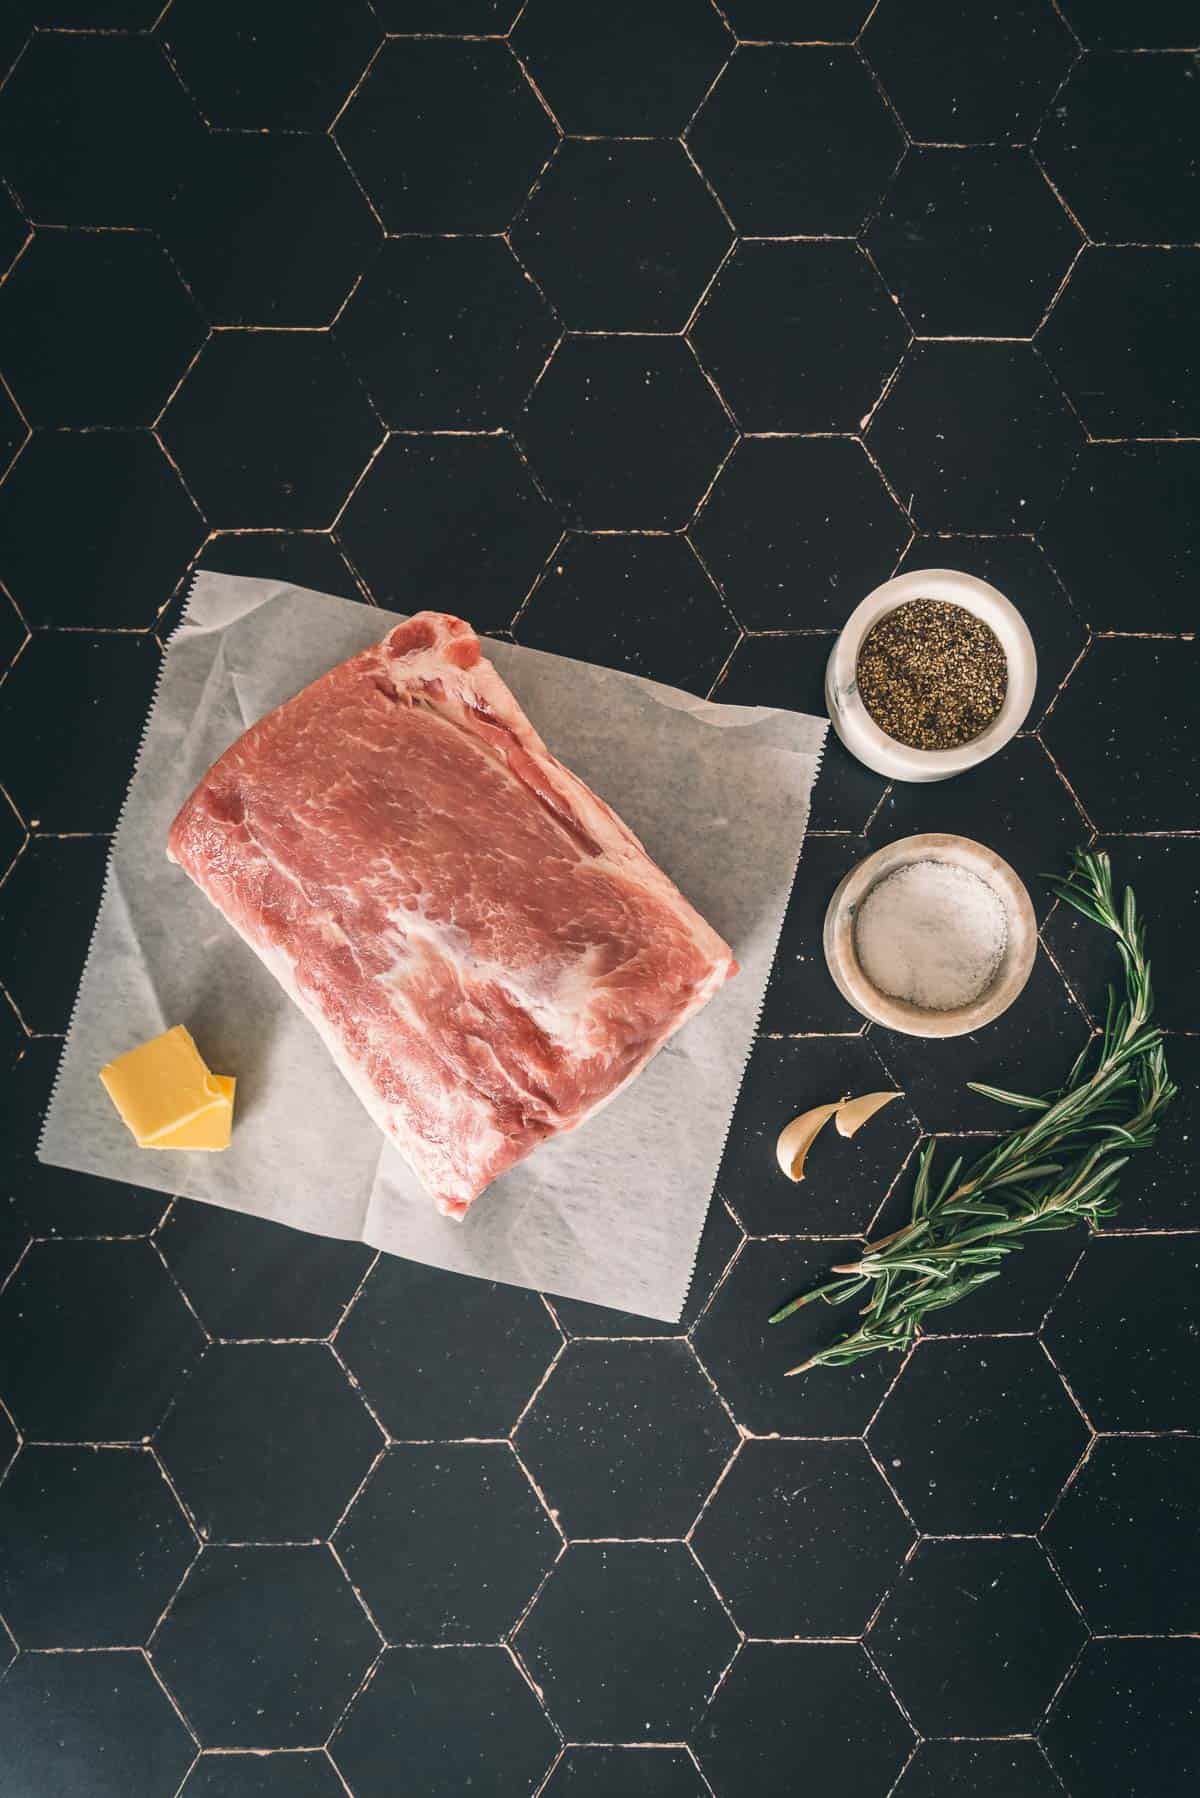 A pork loin on a cutting board with herbs and spices.